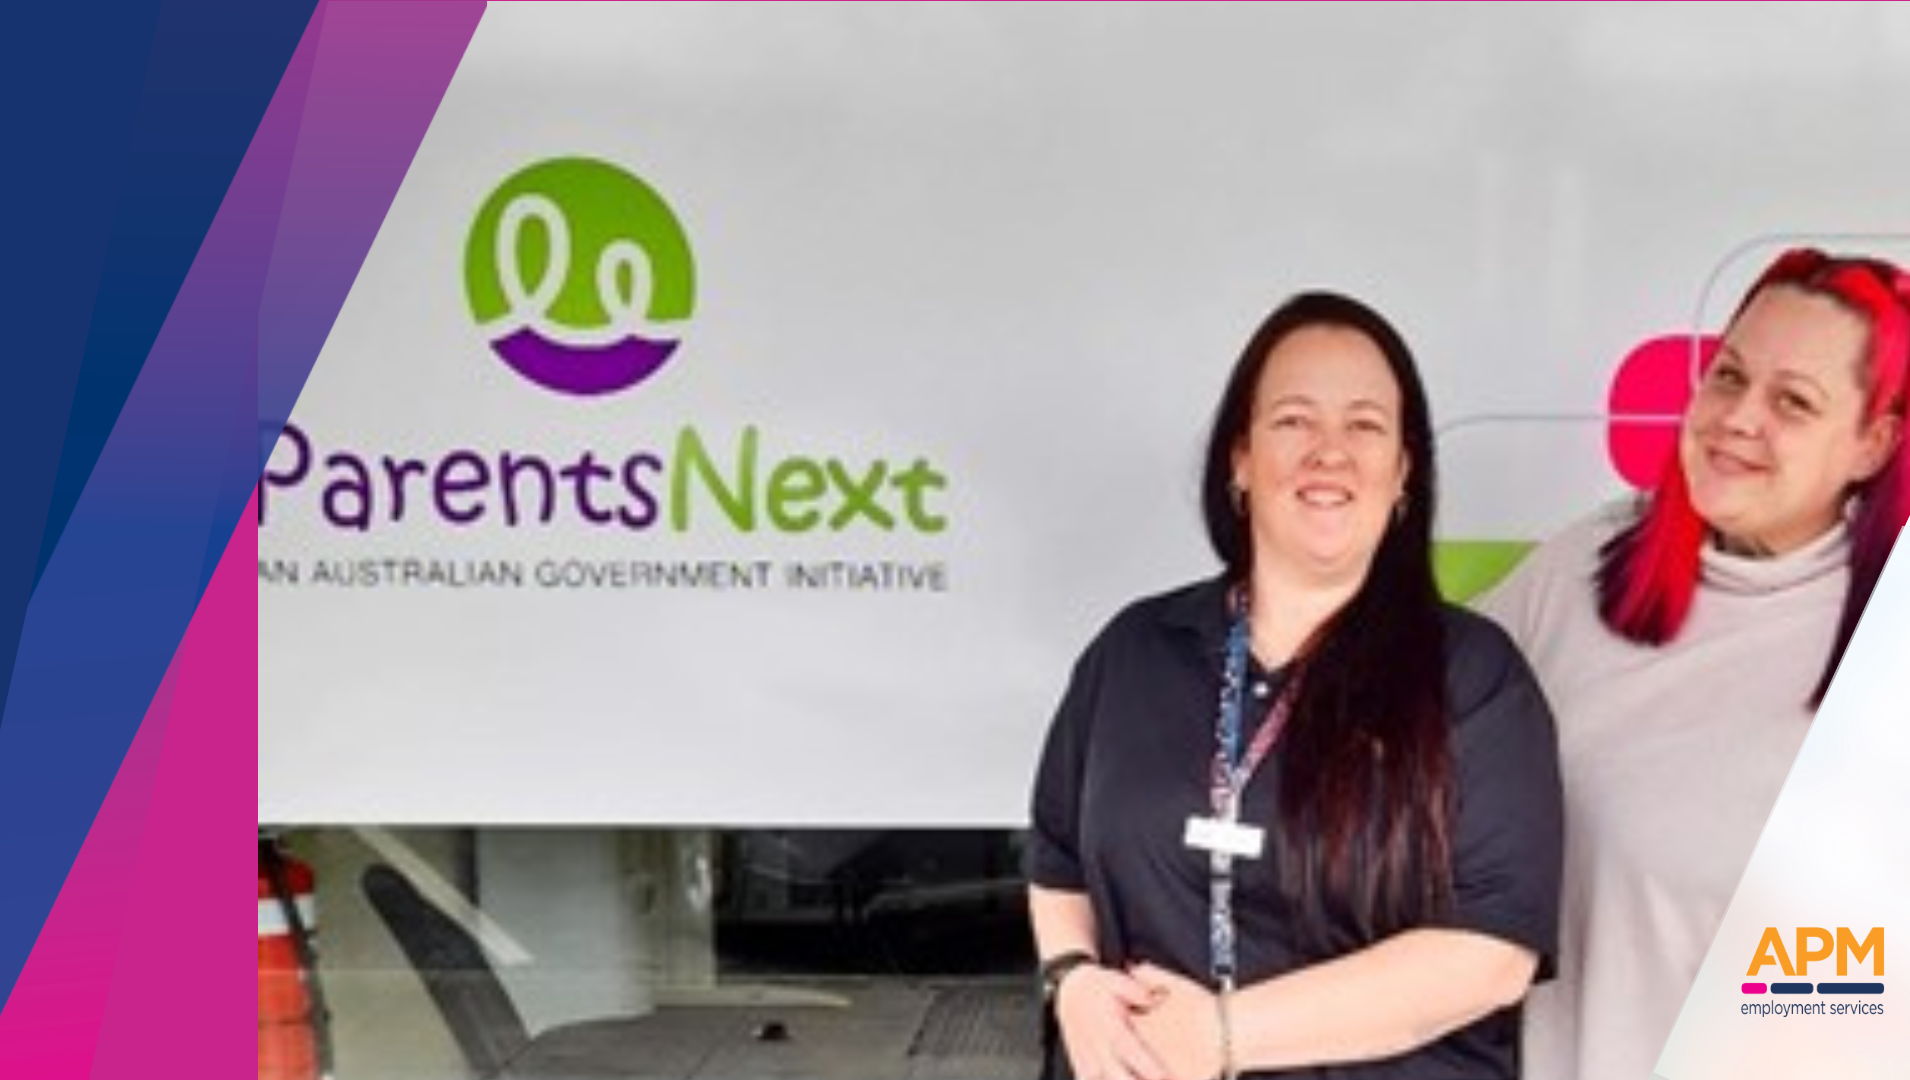 Amy and Stacey pictured in front of APM and ParentsNext signage, both women are smiling